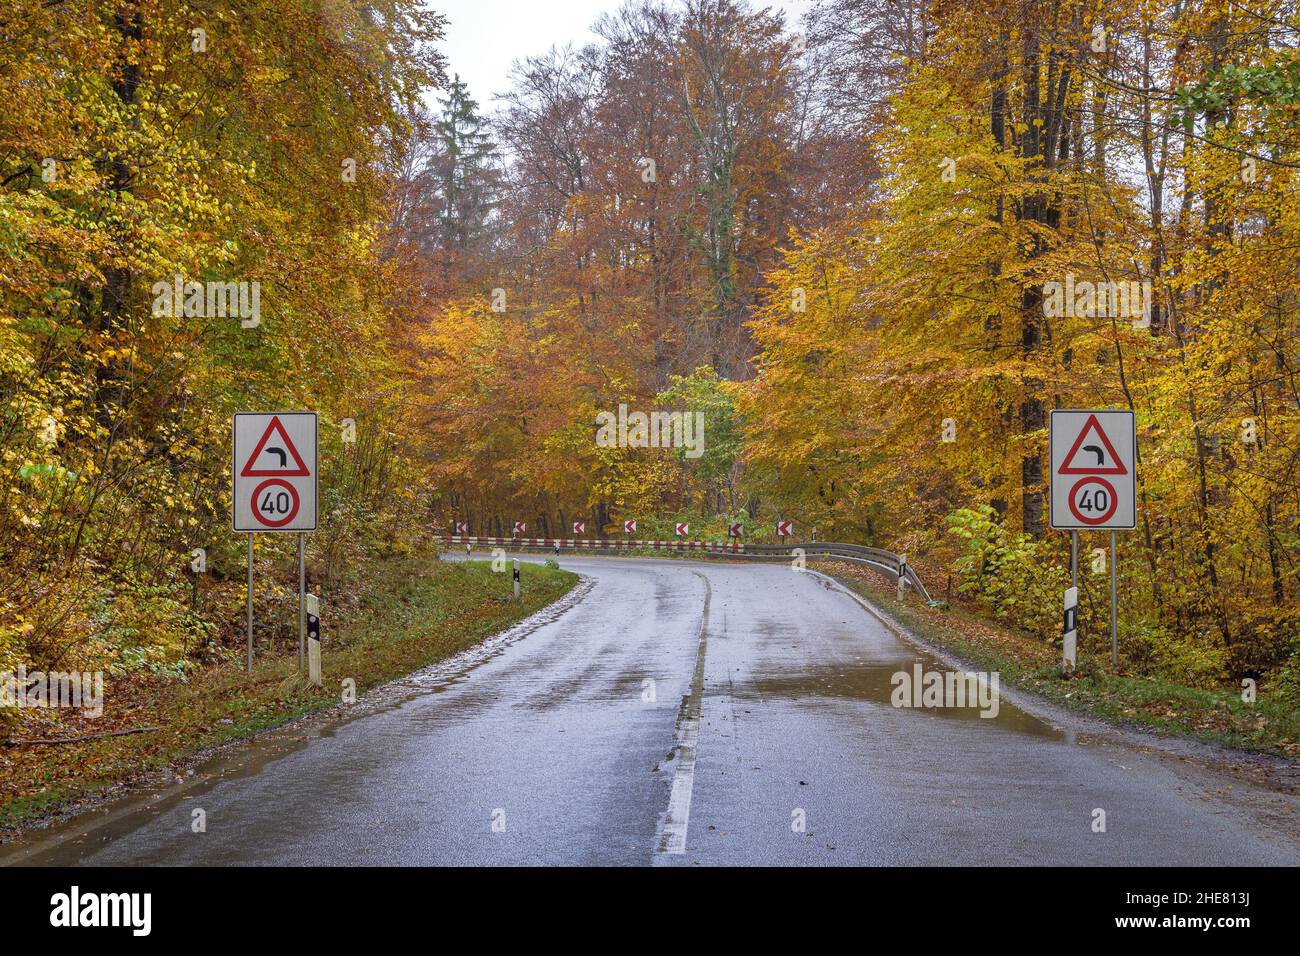 Curve of a wet country road in the rain Upper Bavaria, Bavaria, Germany Stock Photo